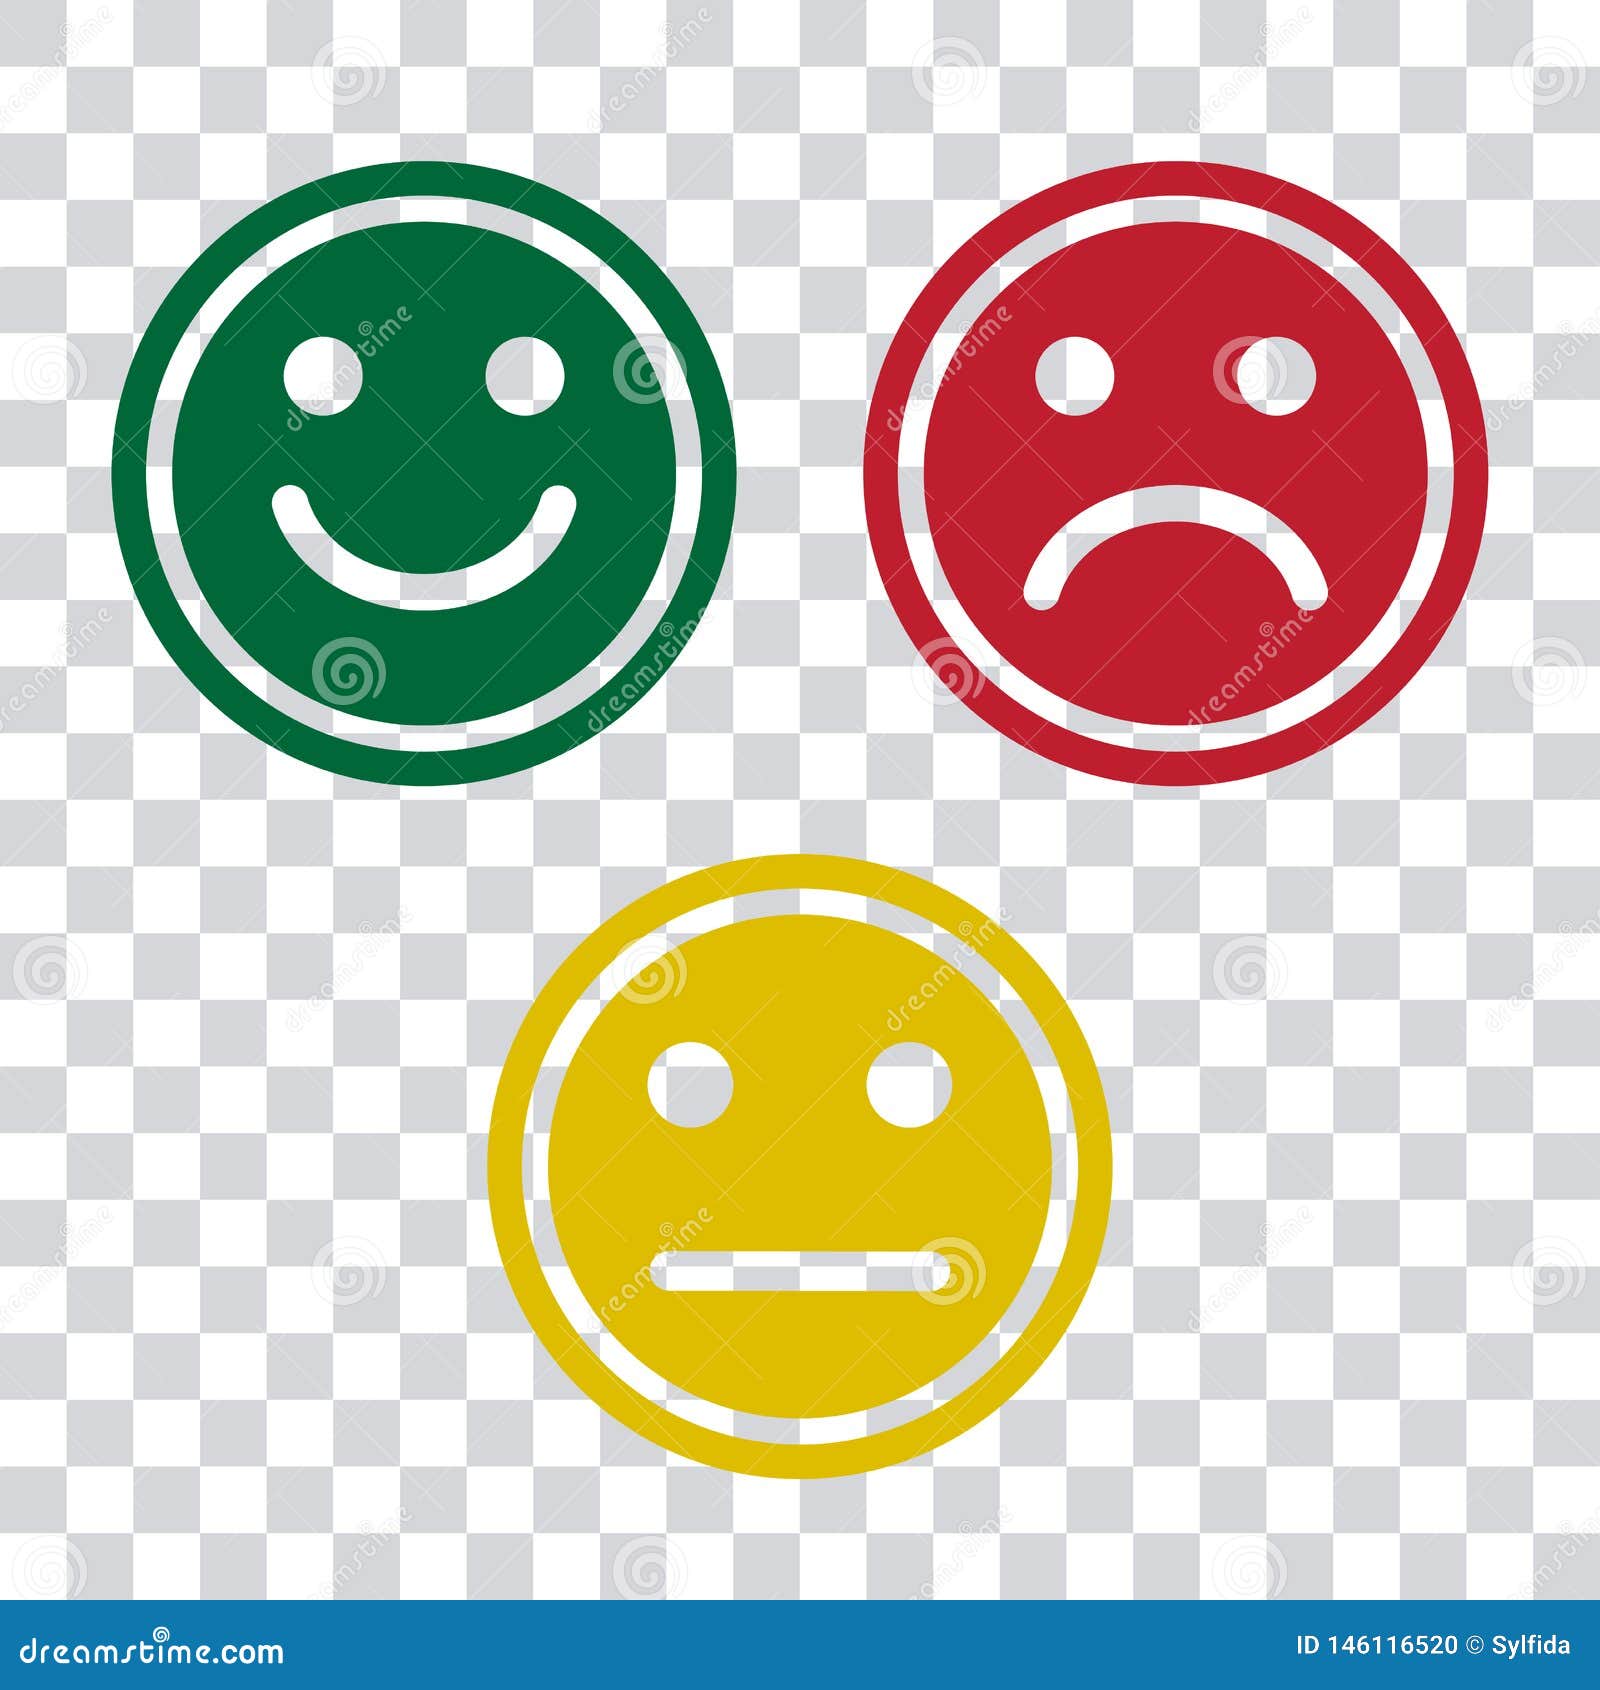 Green Red And Yellow Smileys Emoticons Icon On Transparent Background